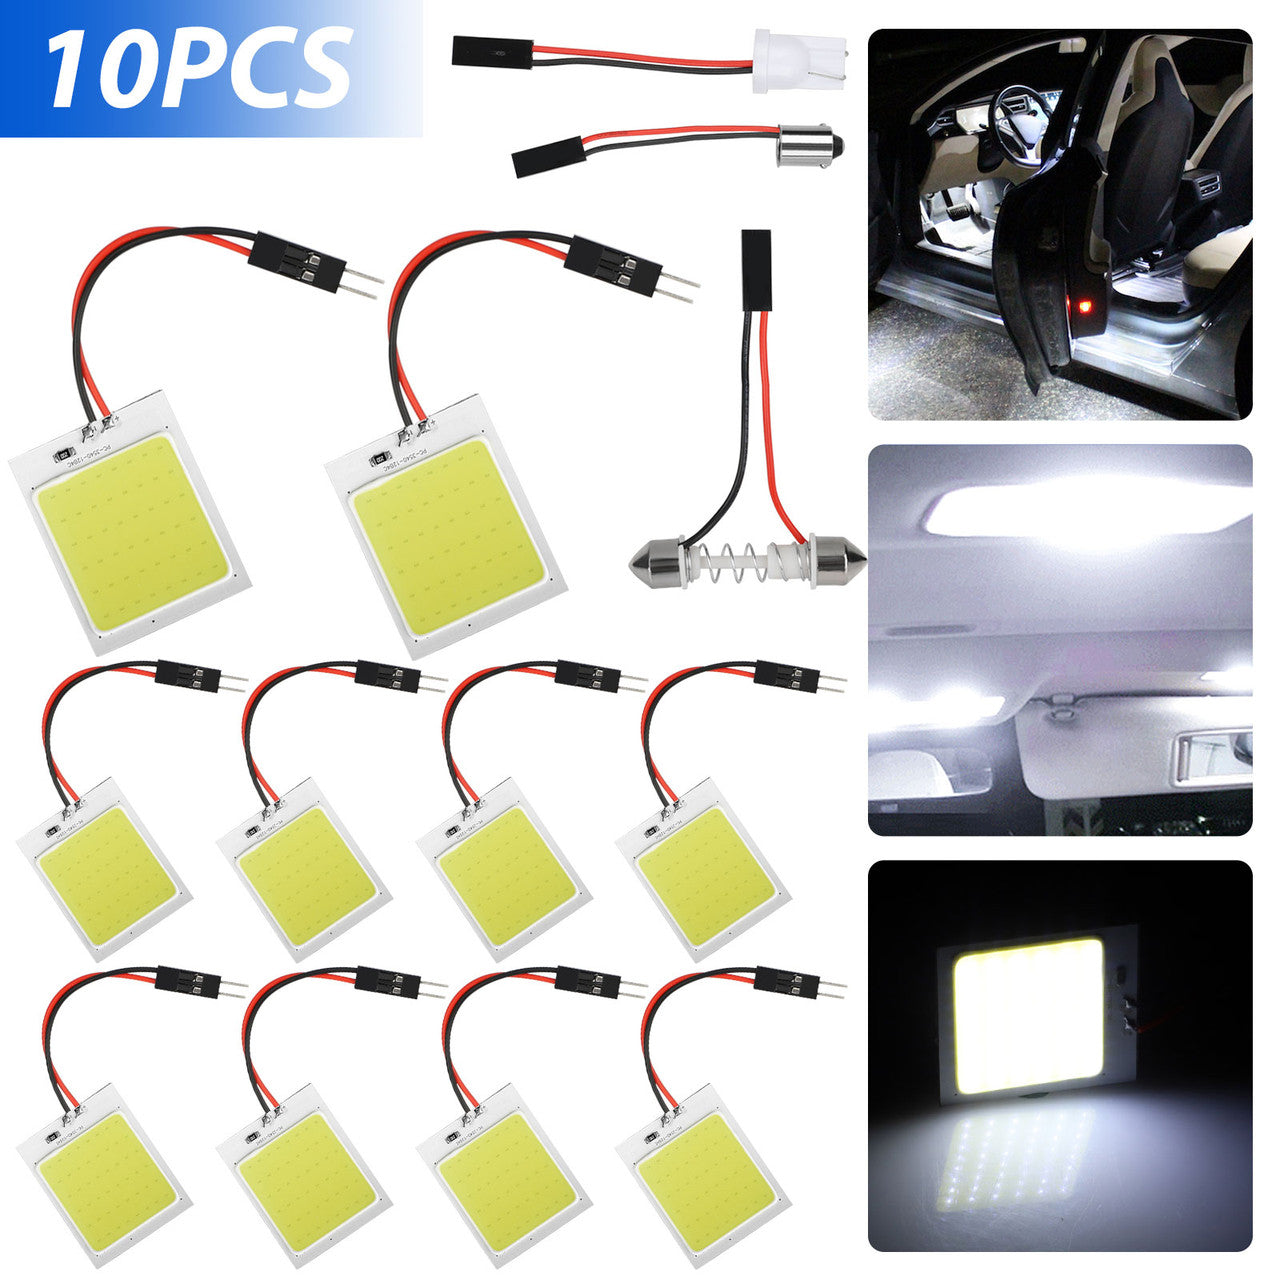 4Pcs 48SMD COB LED Panel Dome Lights, Car Interior Reading Map Lamp with T10/ BA9S/ Festoon Adapters, Instrument Light, Side Door Light, LED License Plate Lights for Car Truck RV SUV, White DC 12V